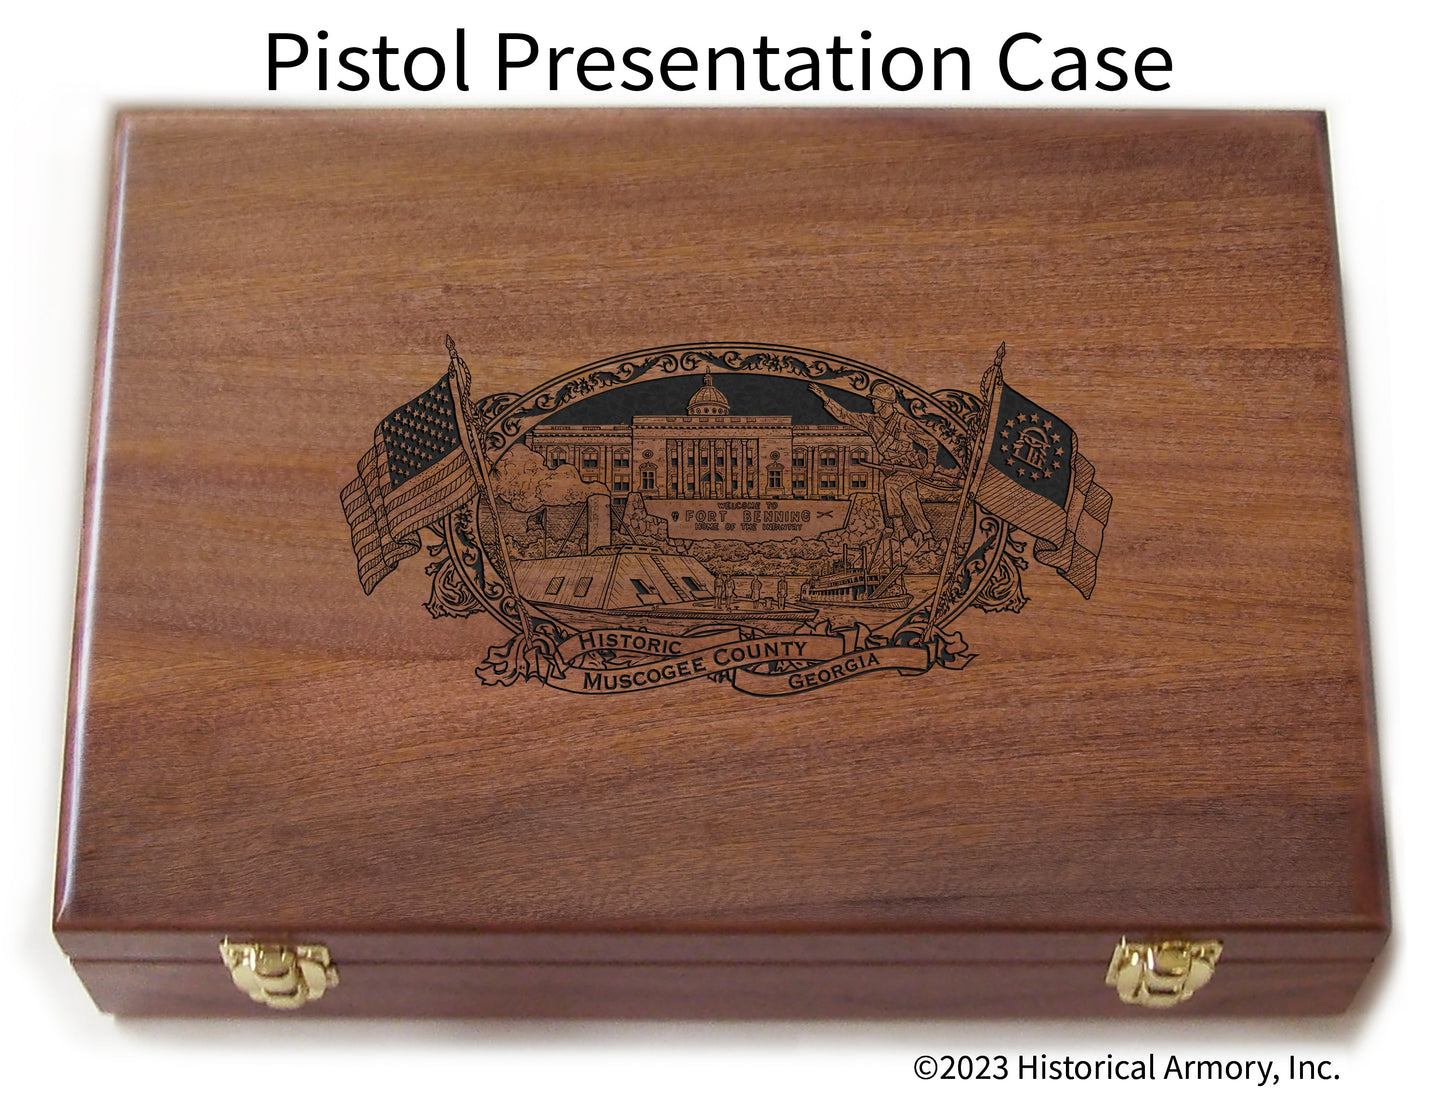 Muscogee County Georgia Engraved .45 Auto Ruger 1911 Presentation Case